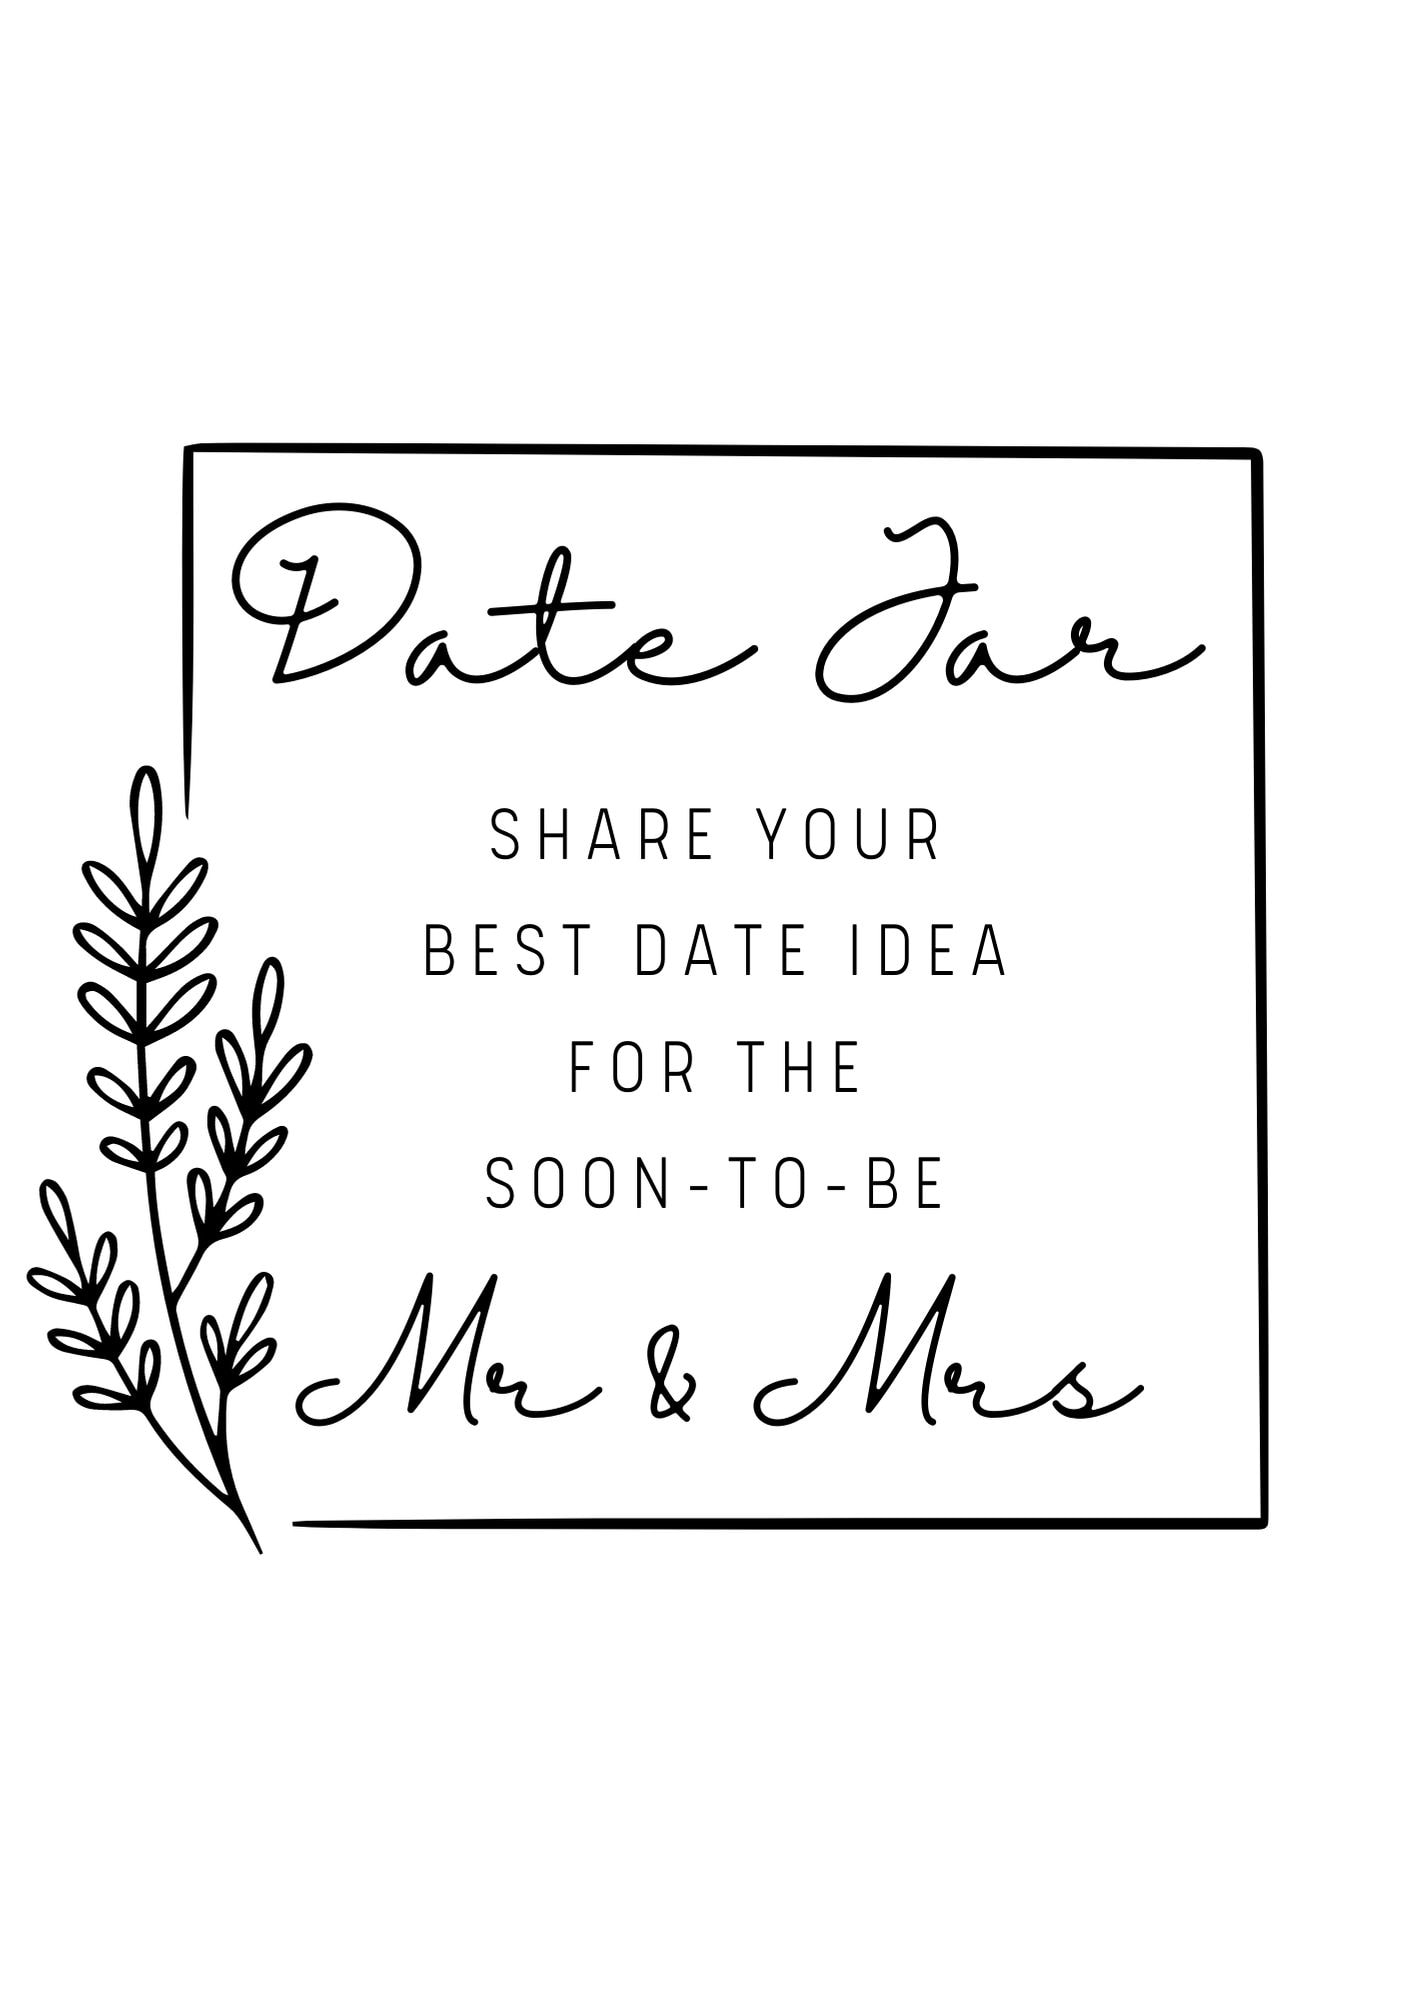 this-date-night-jar-sign-can-be-displayed-at-your-wedding-features